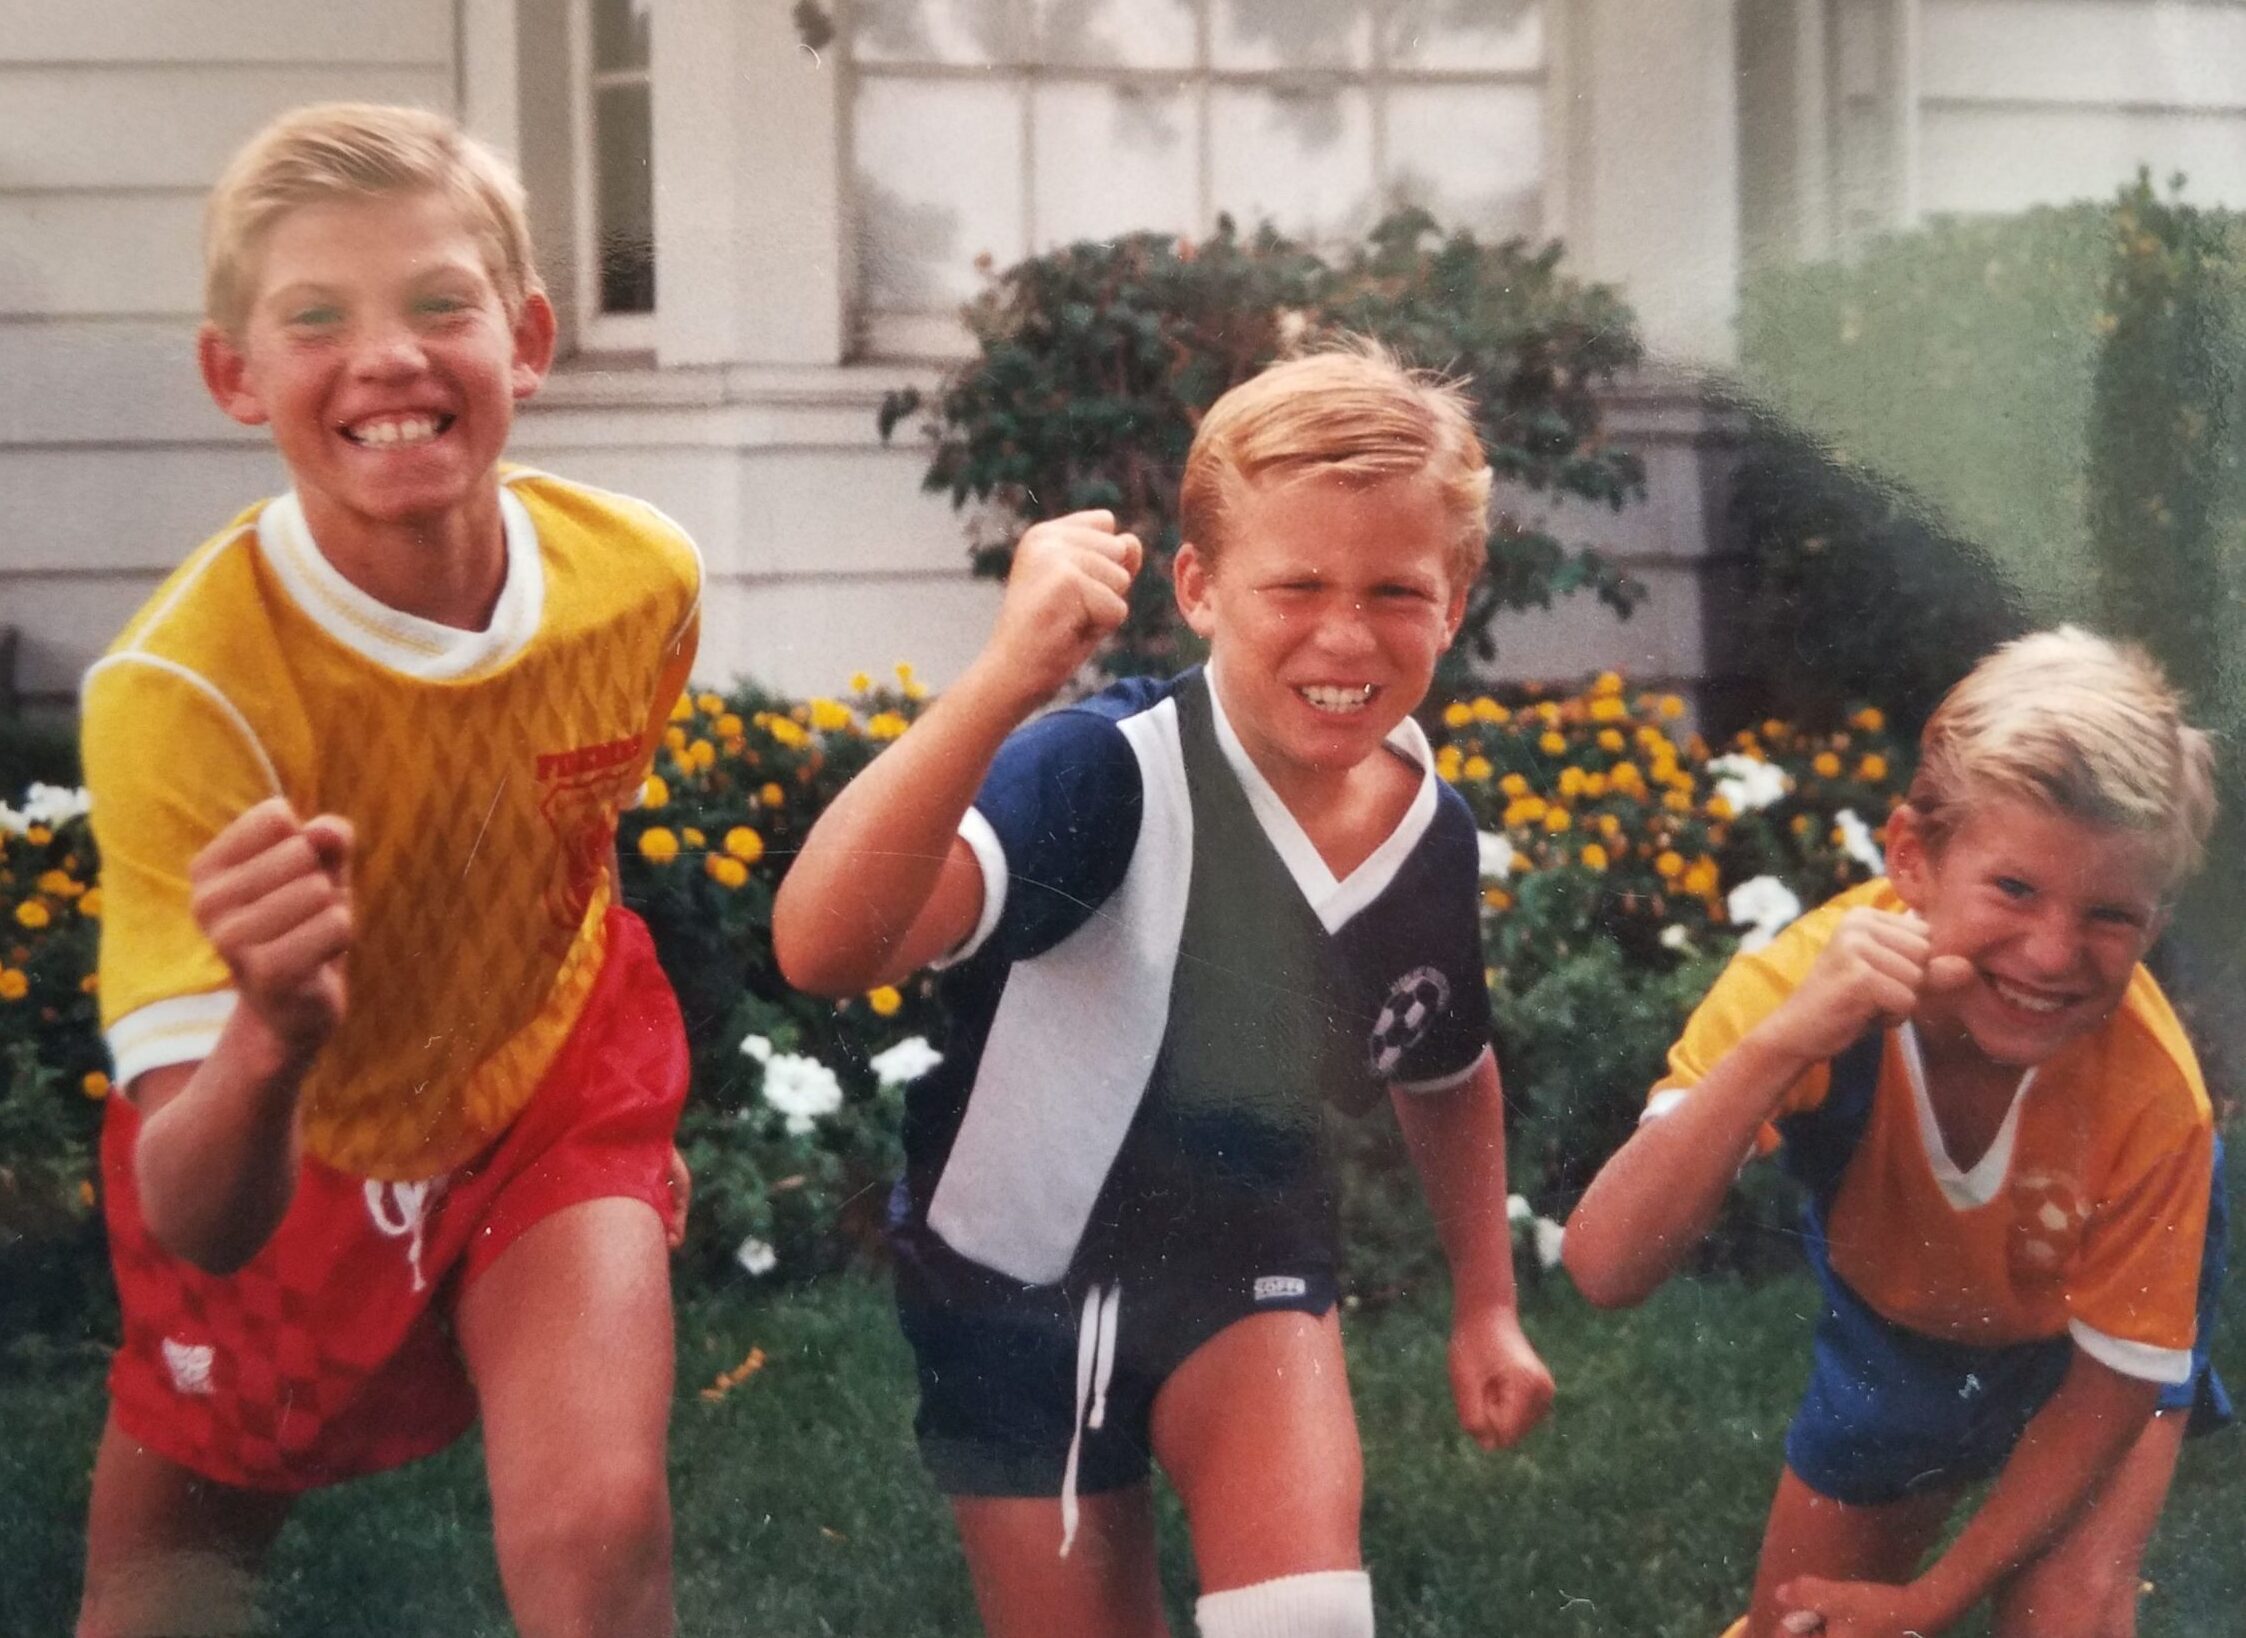 Tyler, Brannon, and Rex Patrick as kids dressed in soccer uniforms ready for action!